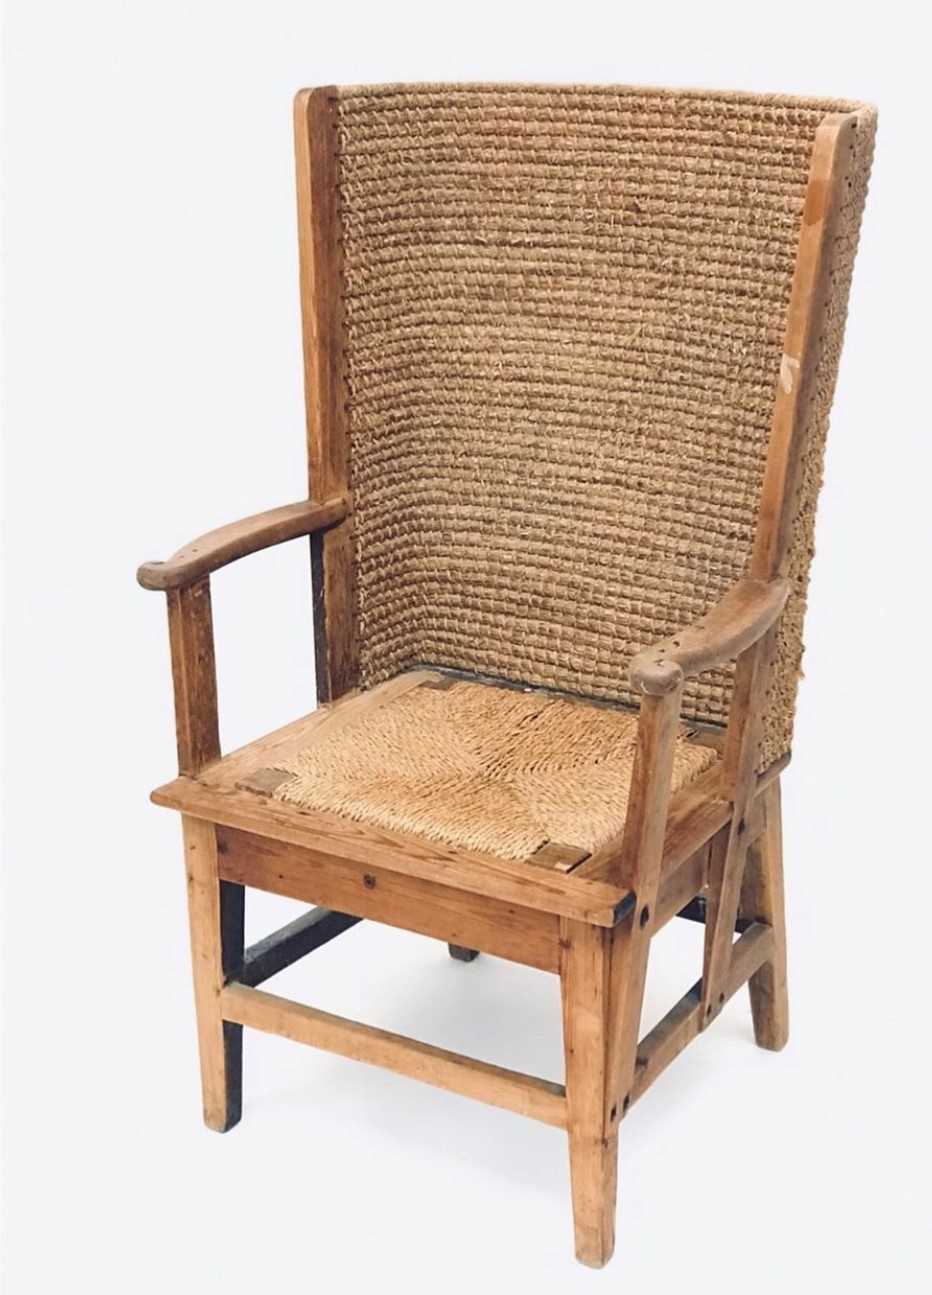 Lot 3469 - A pine Orkney chair, circa 1900, with woven...